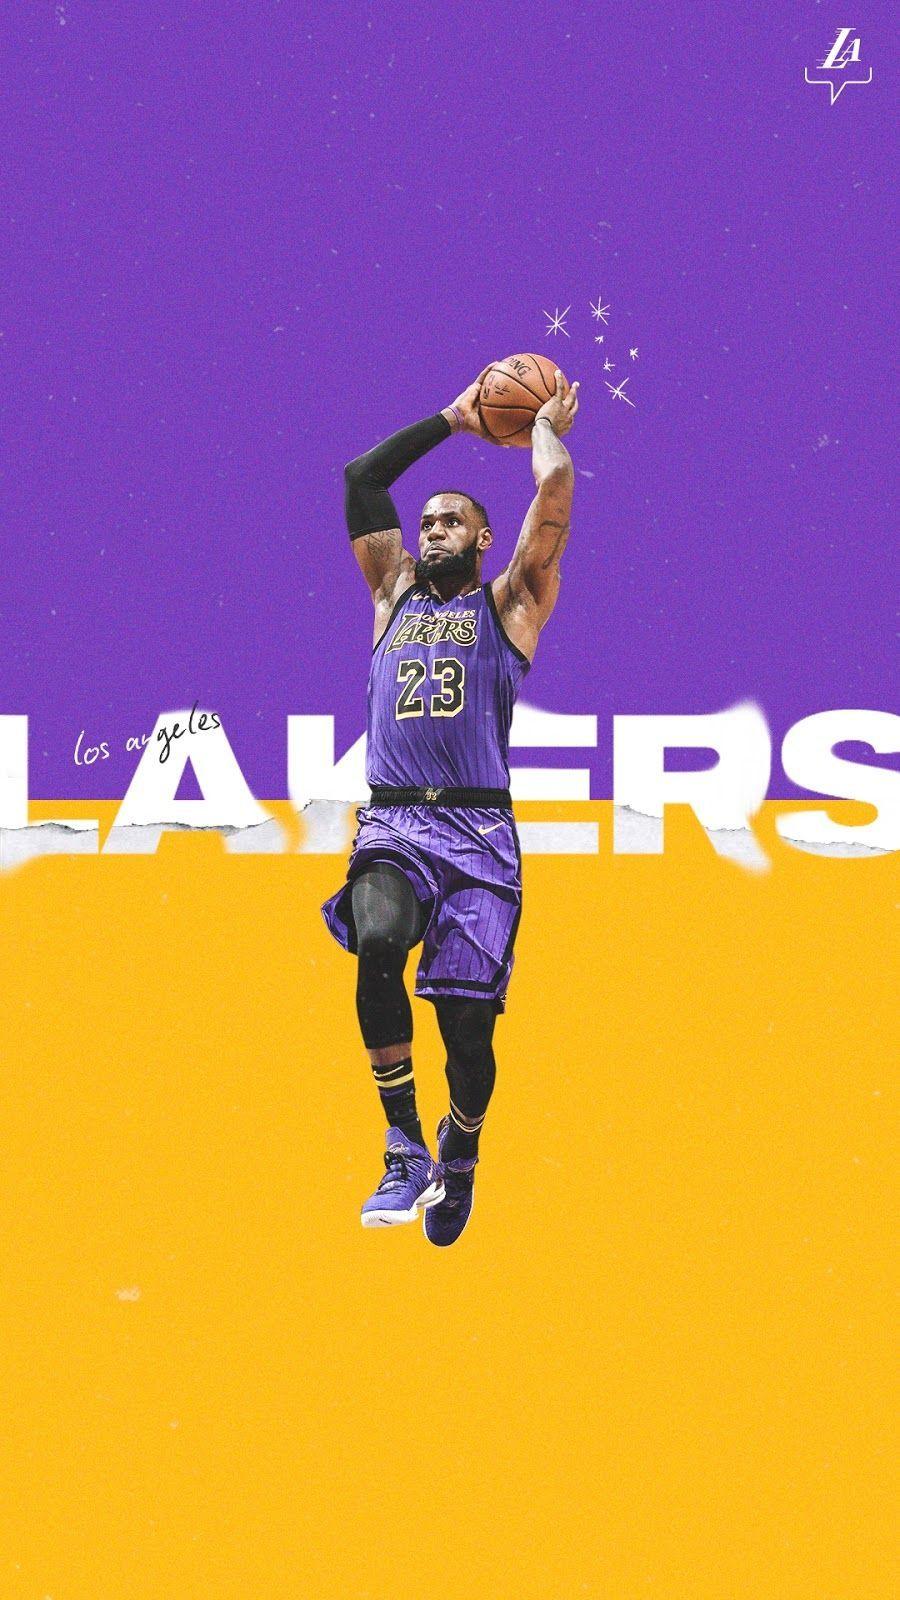 Mobile wallpaper: Sports, Basketball, Logo, Nba, Los Angeles Lakers,  1173191 download the picture for free.